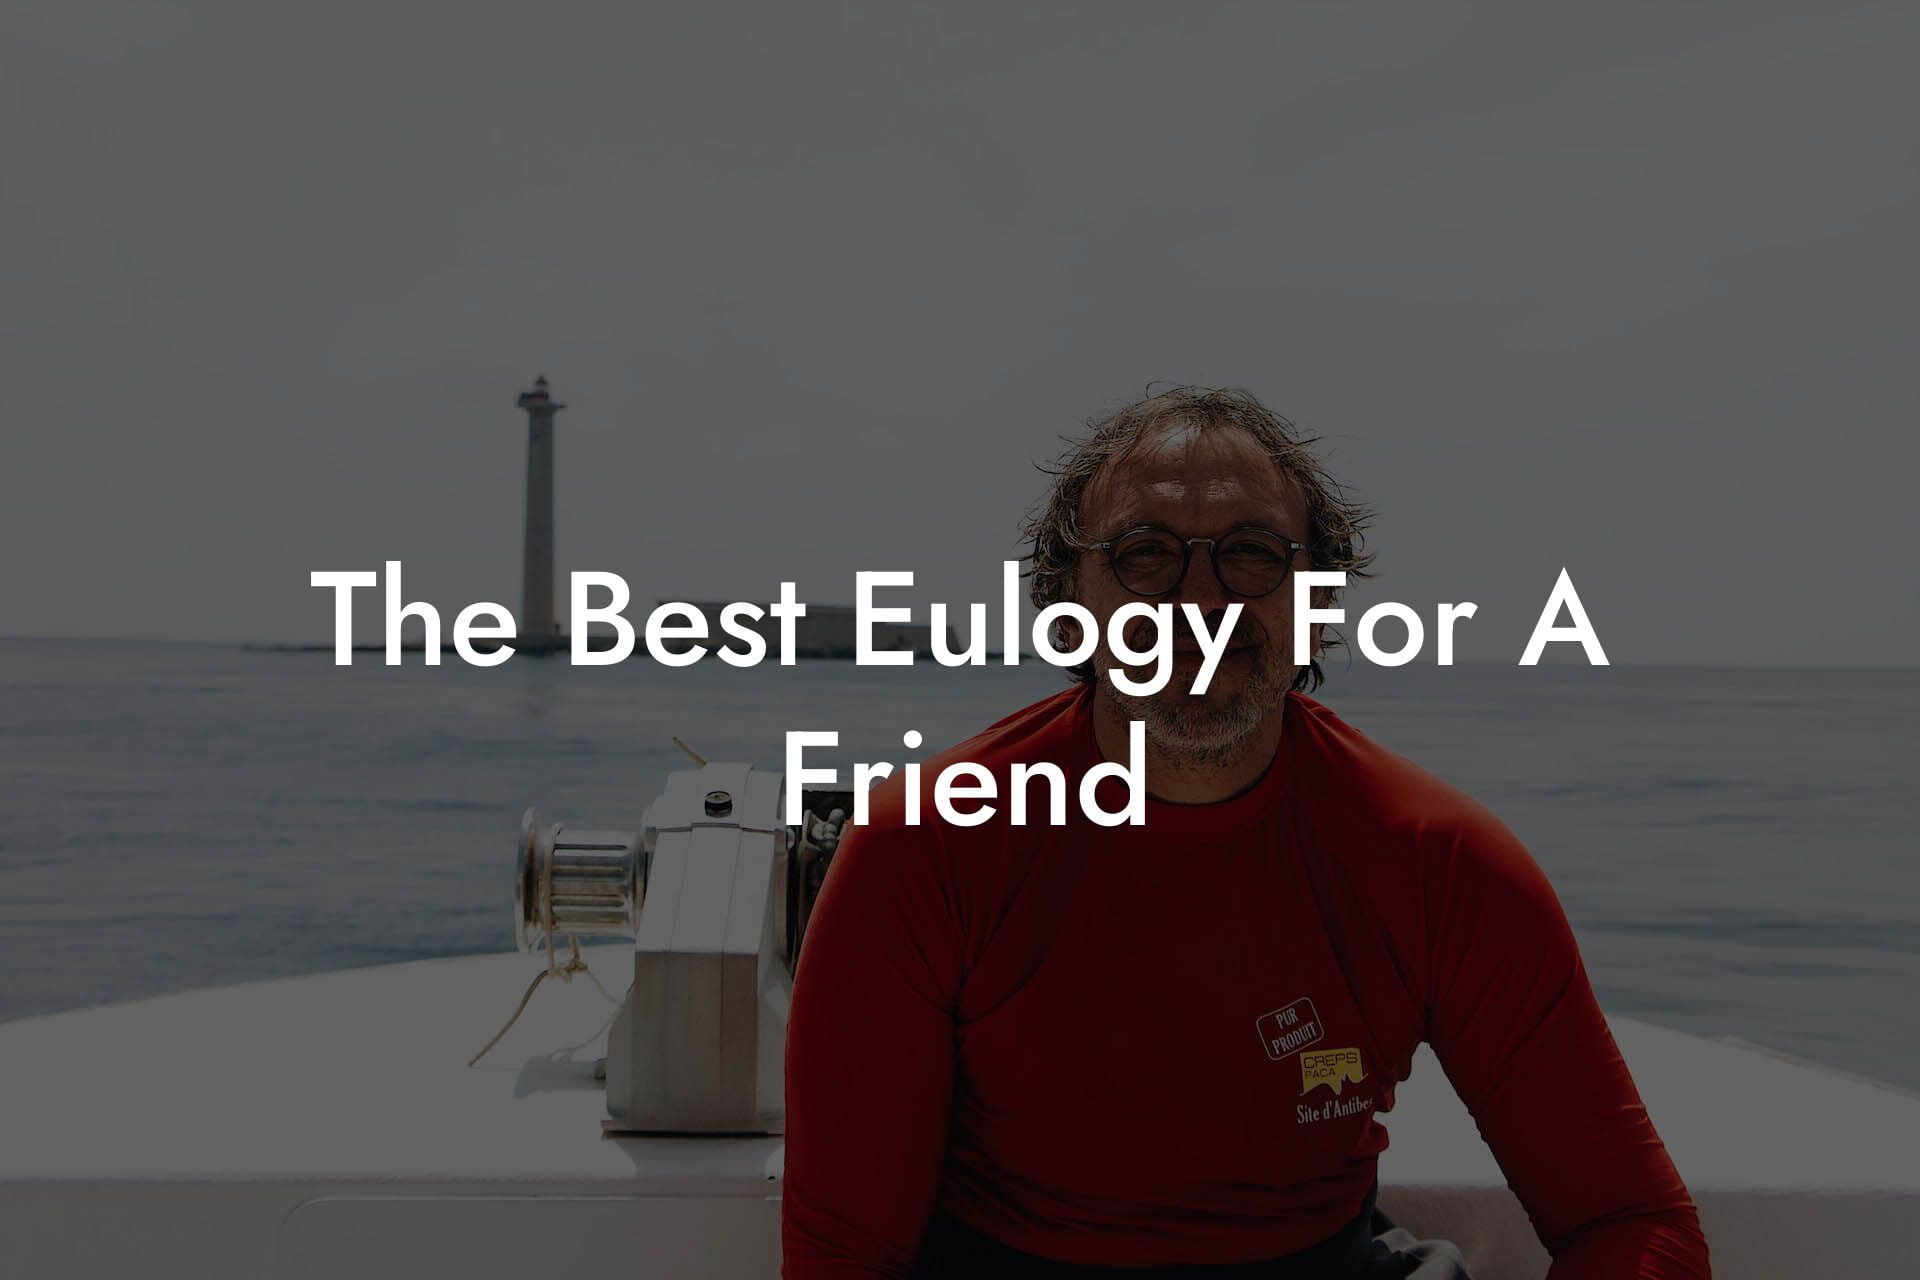 The Best Eulogy For A Friend